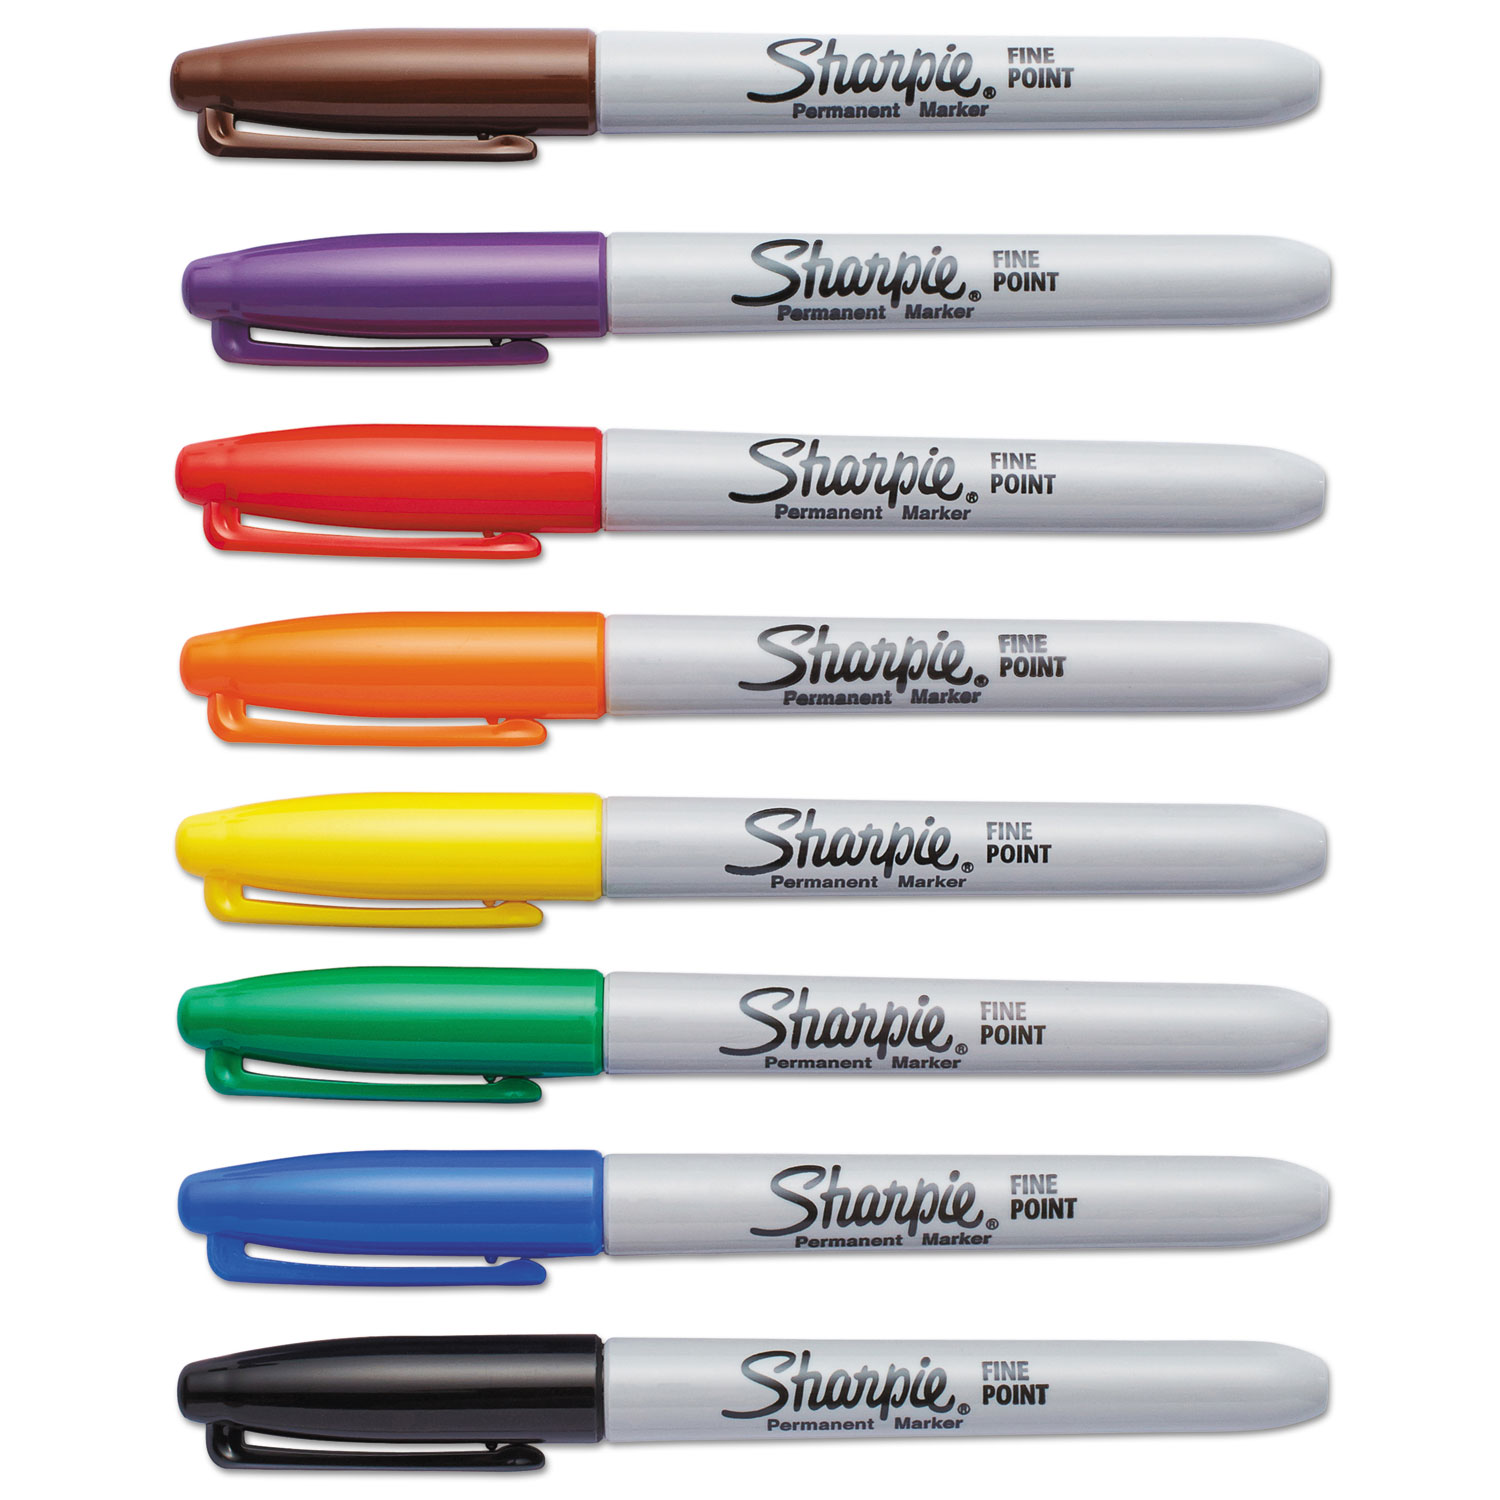 Sharpie Permanent Markers Ultimate Collection, Assorted Tips, Assorted Colors, 72/Set